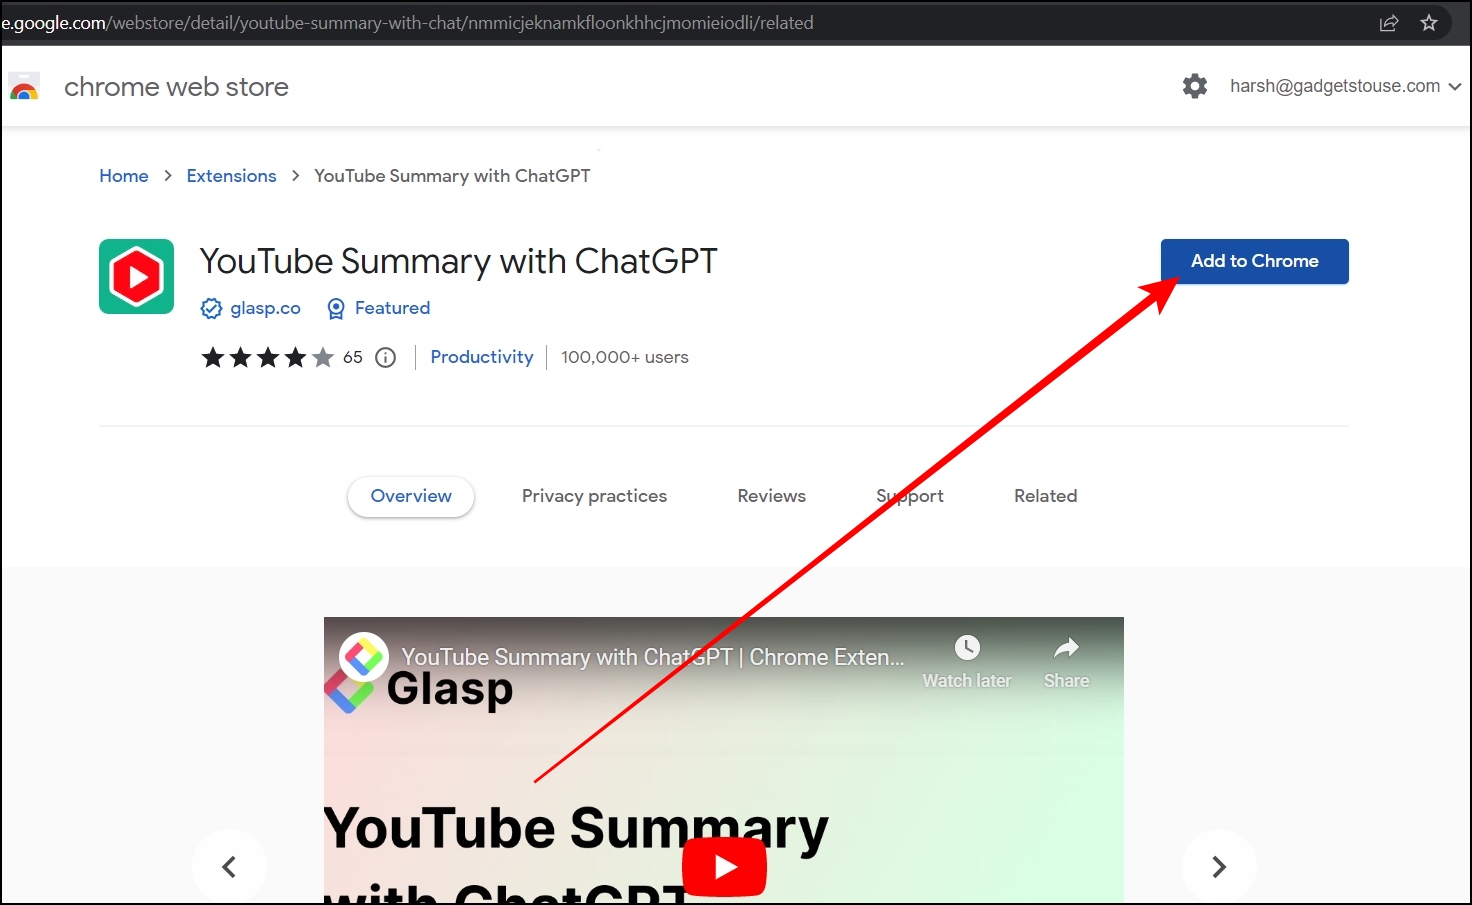 YouTube Summary with ChatGPT